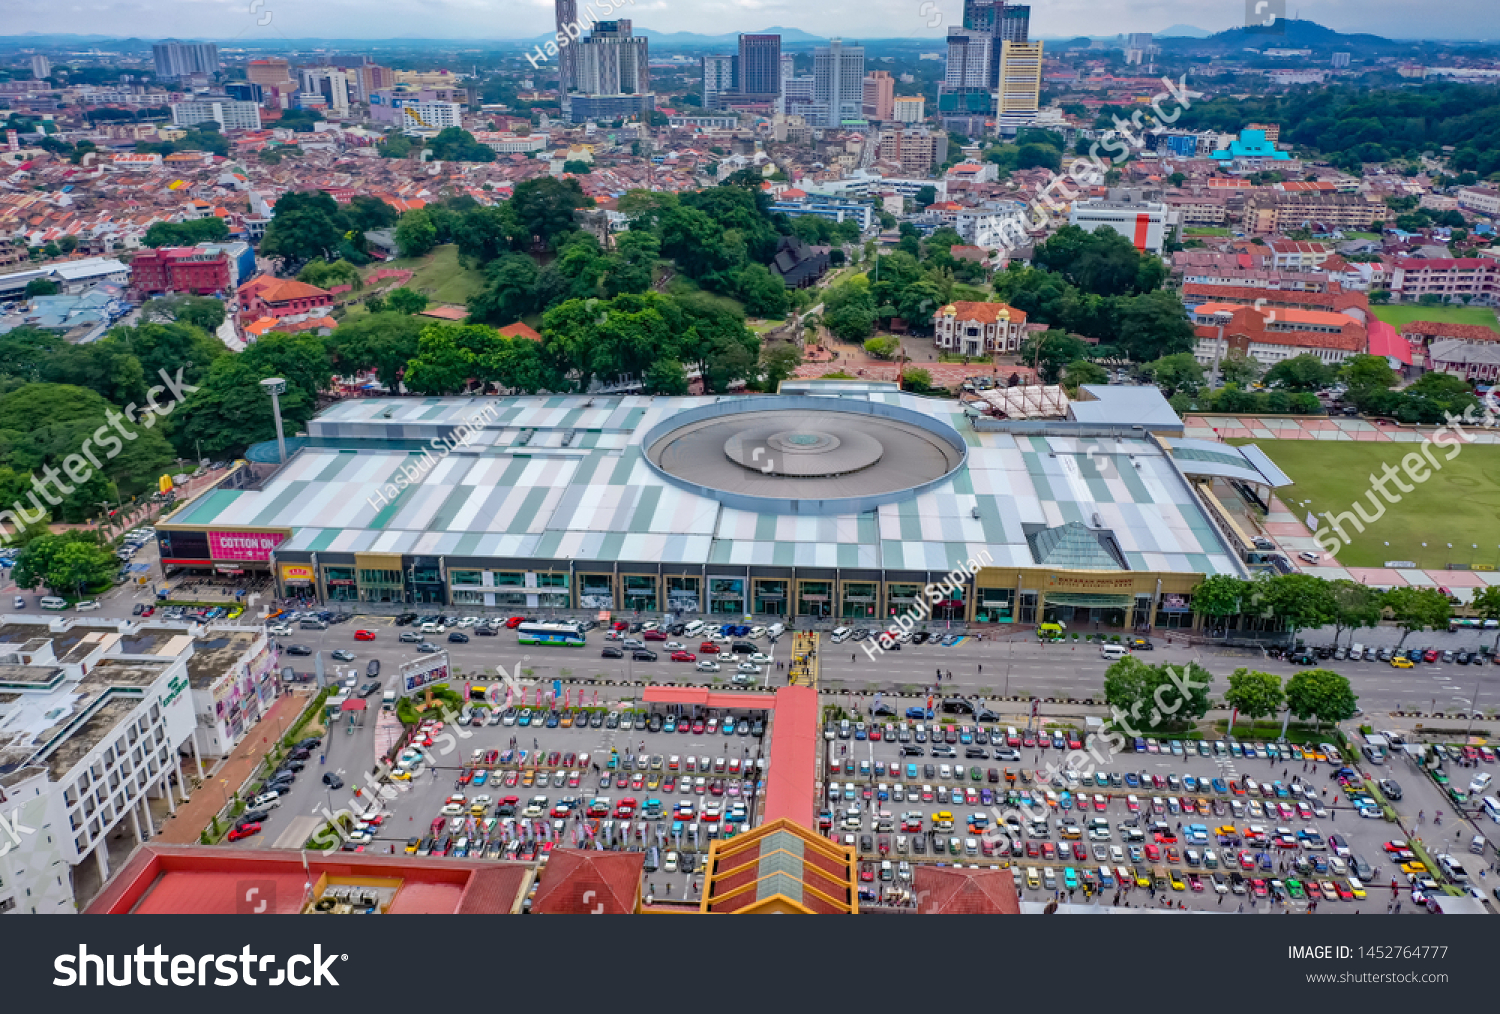 Malacca, Malaysia - July 7 2019: Aerial View Dataran Pahlawan Melaka Megamall In Malacca City With Full Car Parking Opposite It #1452764777